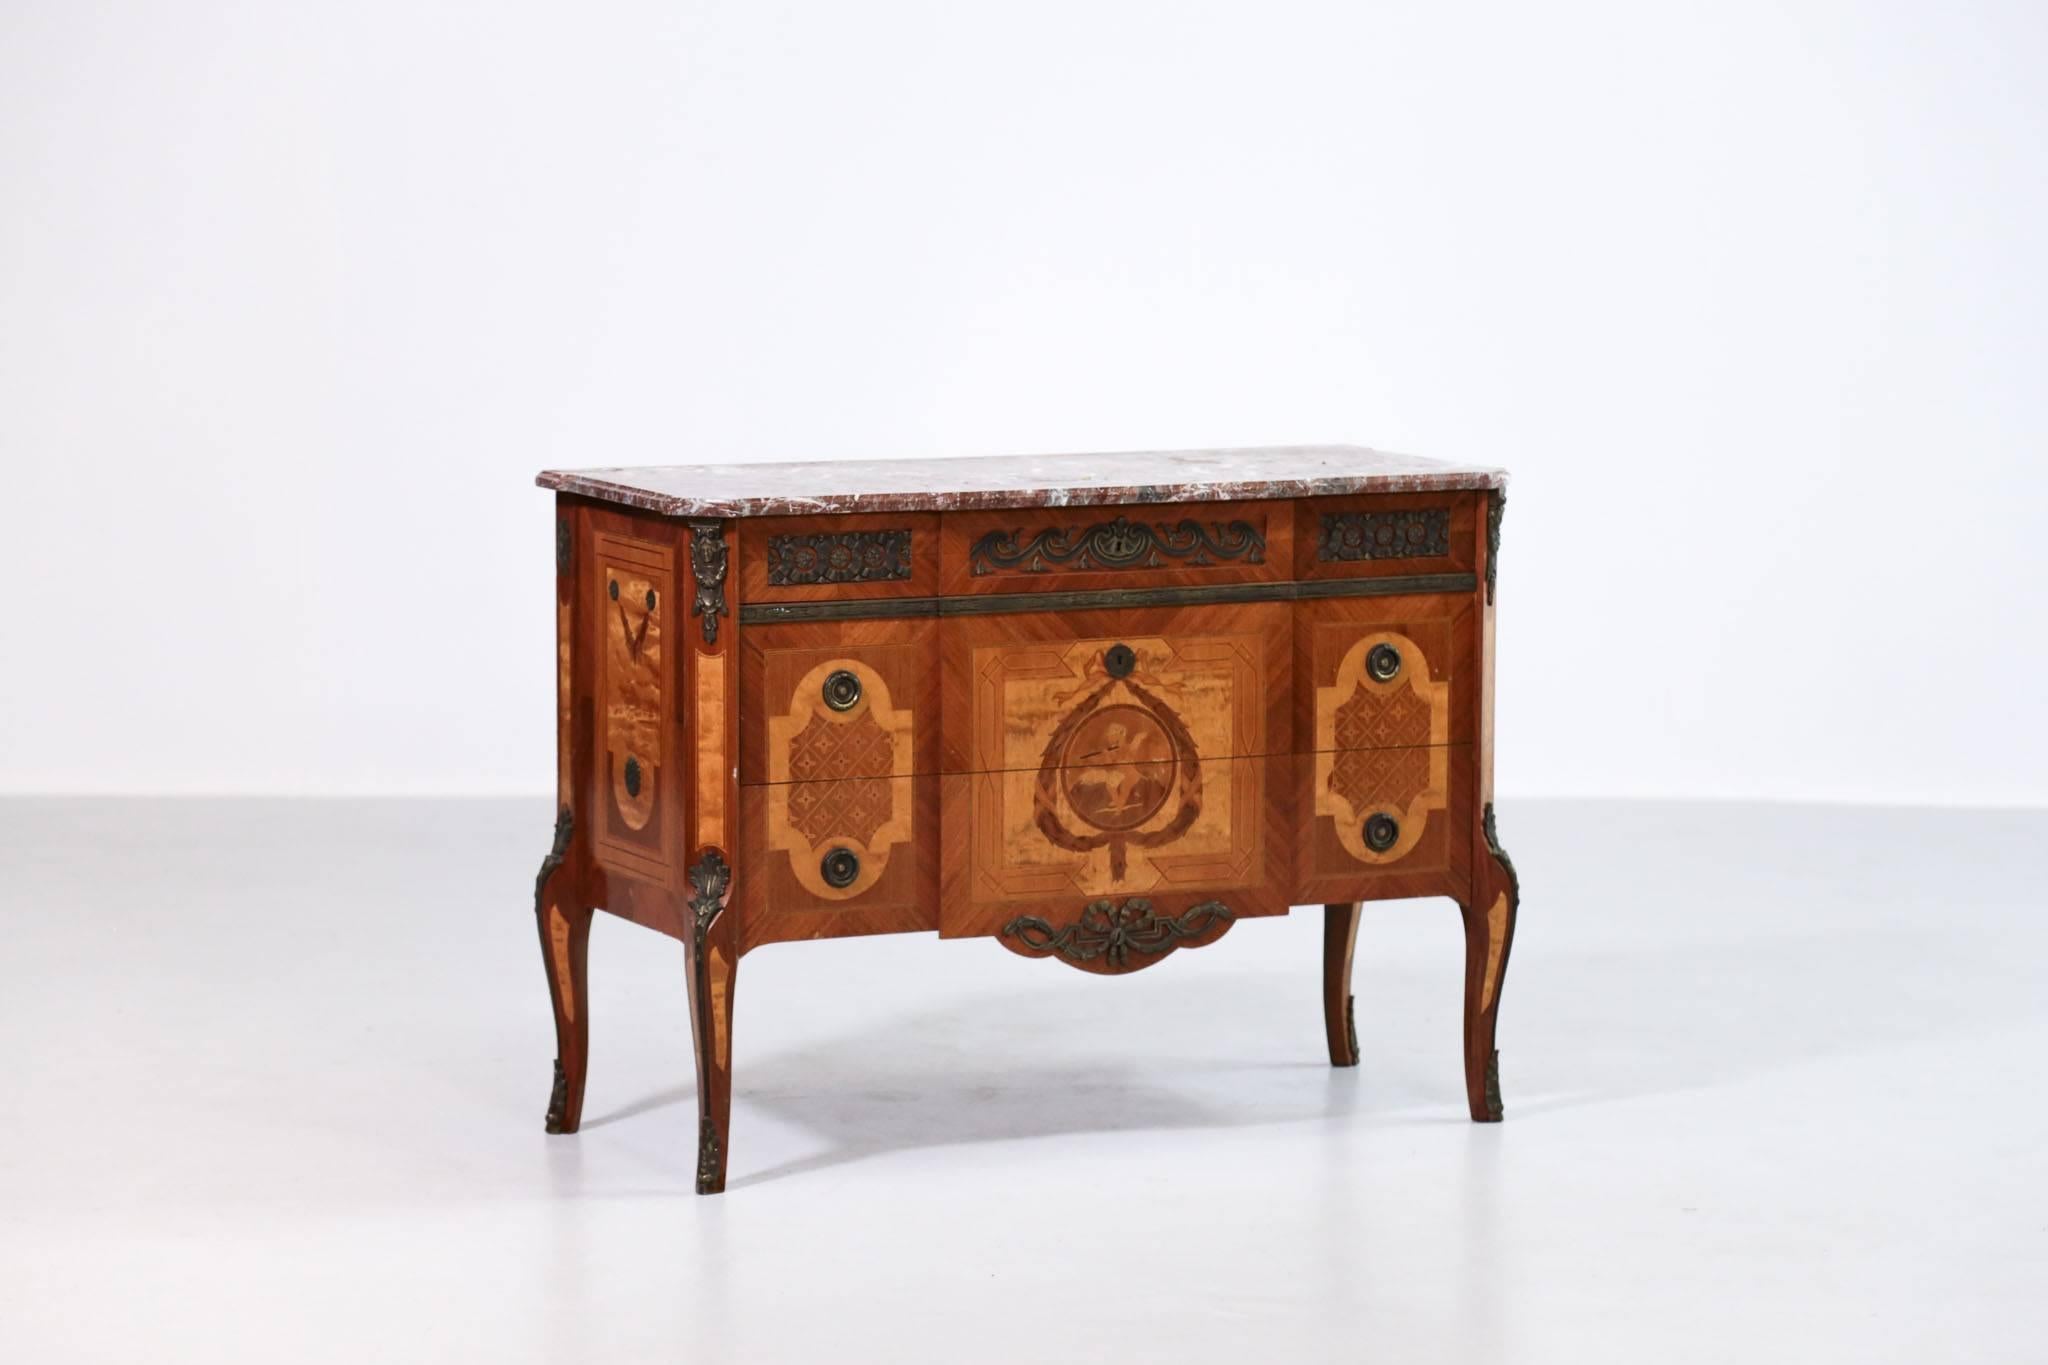 Commode in the style of Louis XV - XVI.
Nice marquetry with a marble top.